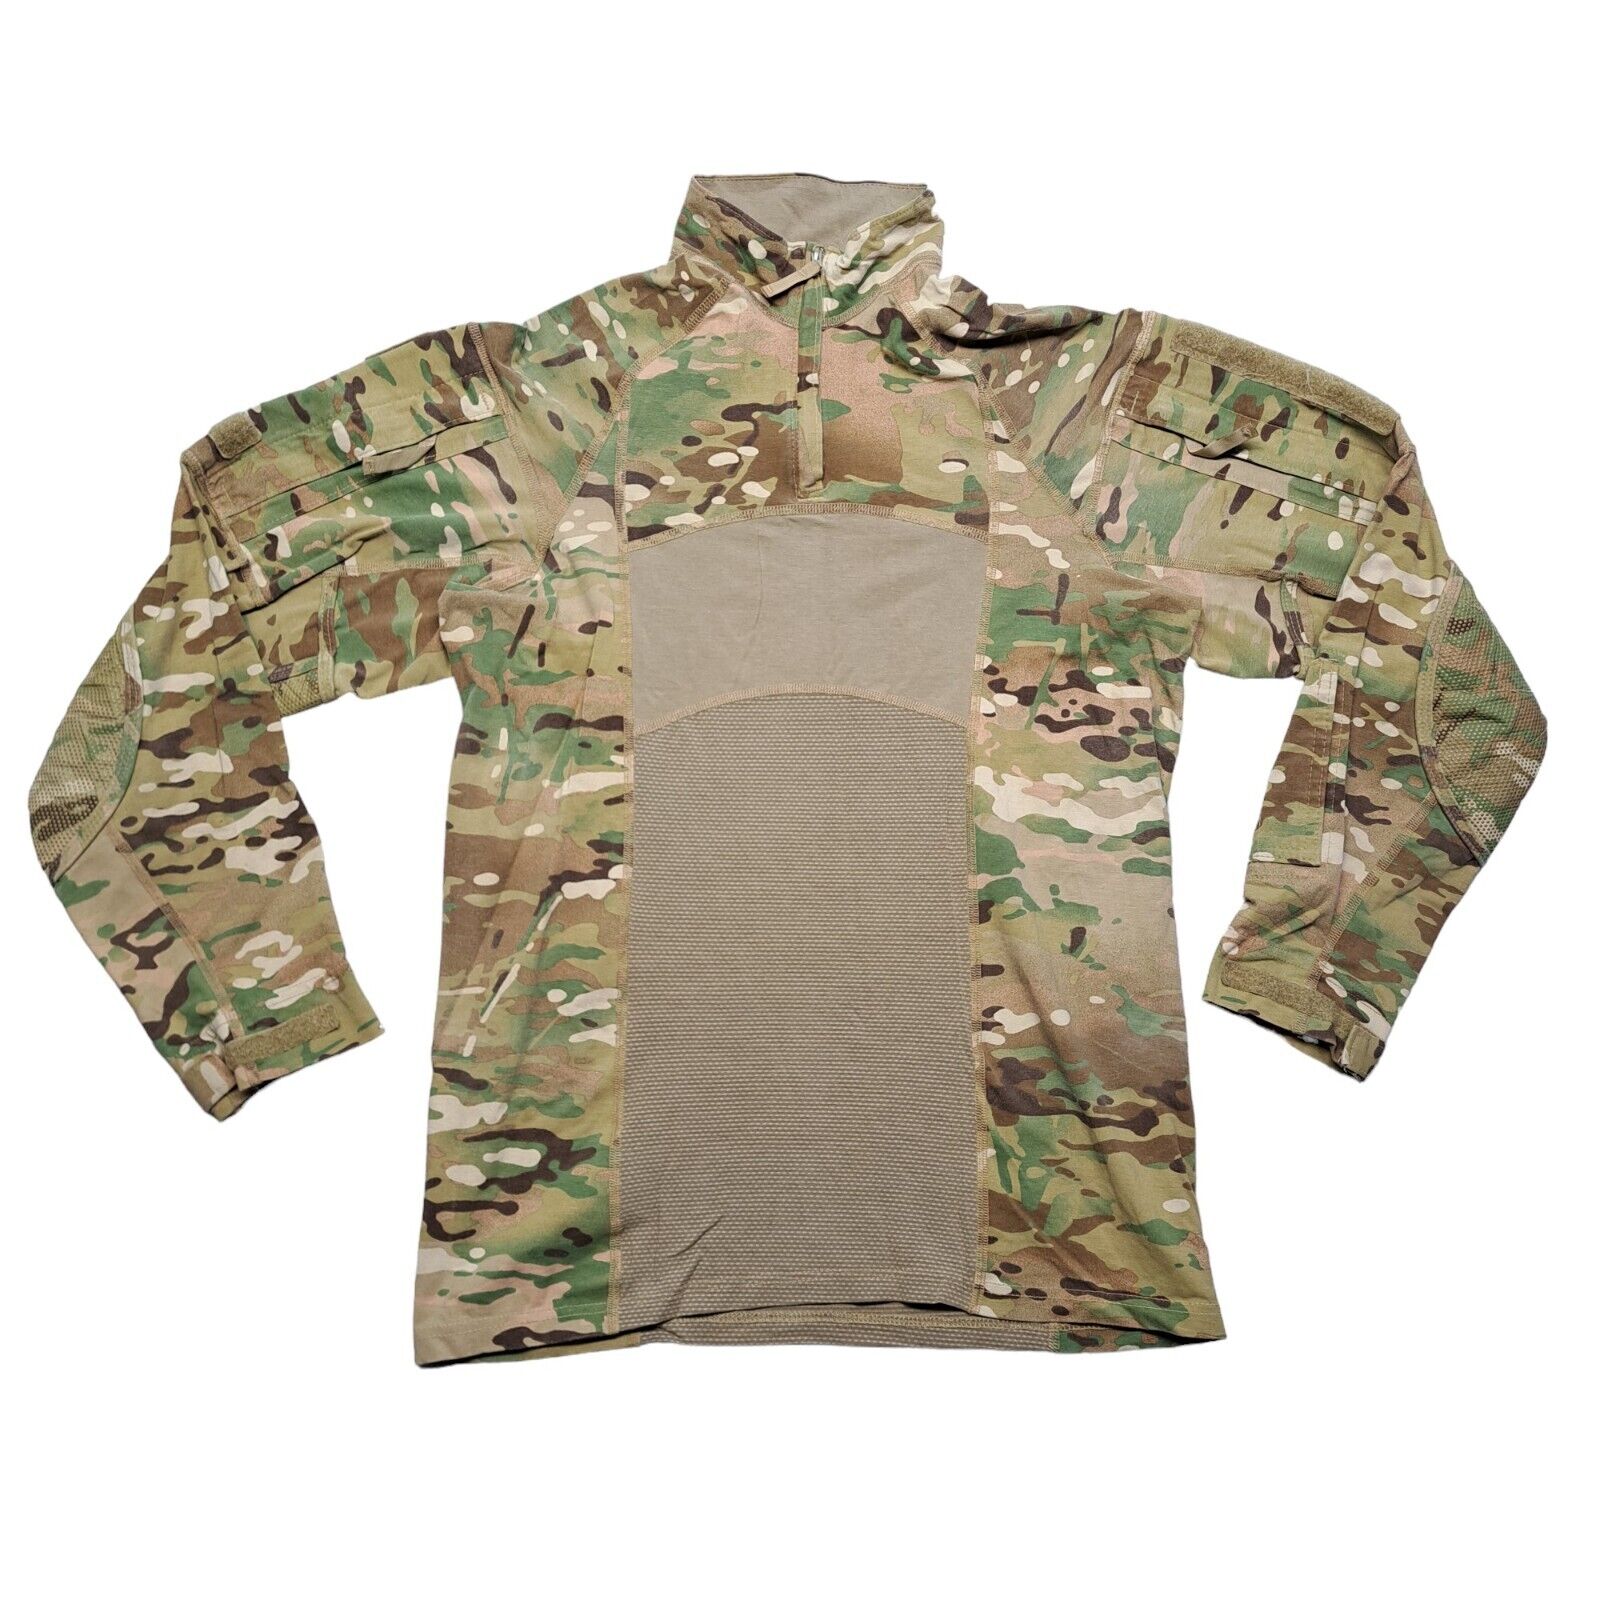 Advanced Military Army Combat Tactical Shirt FR Flame Resistant Mens M Multicam